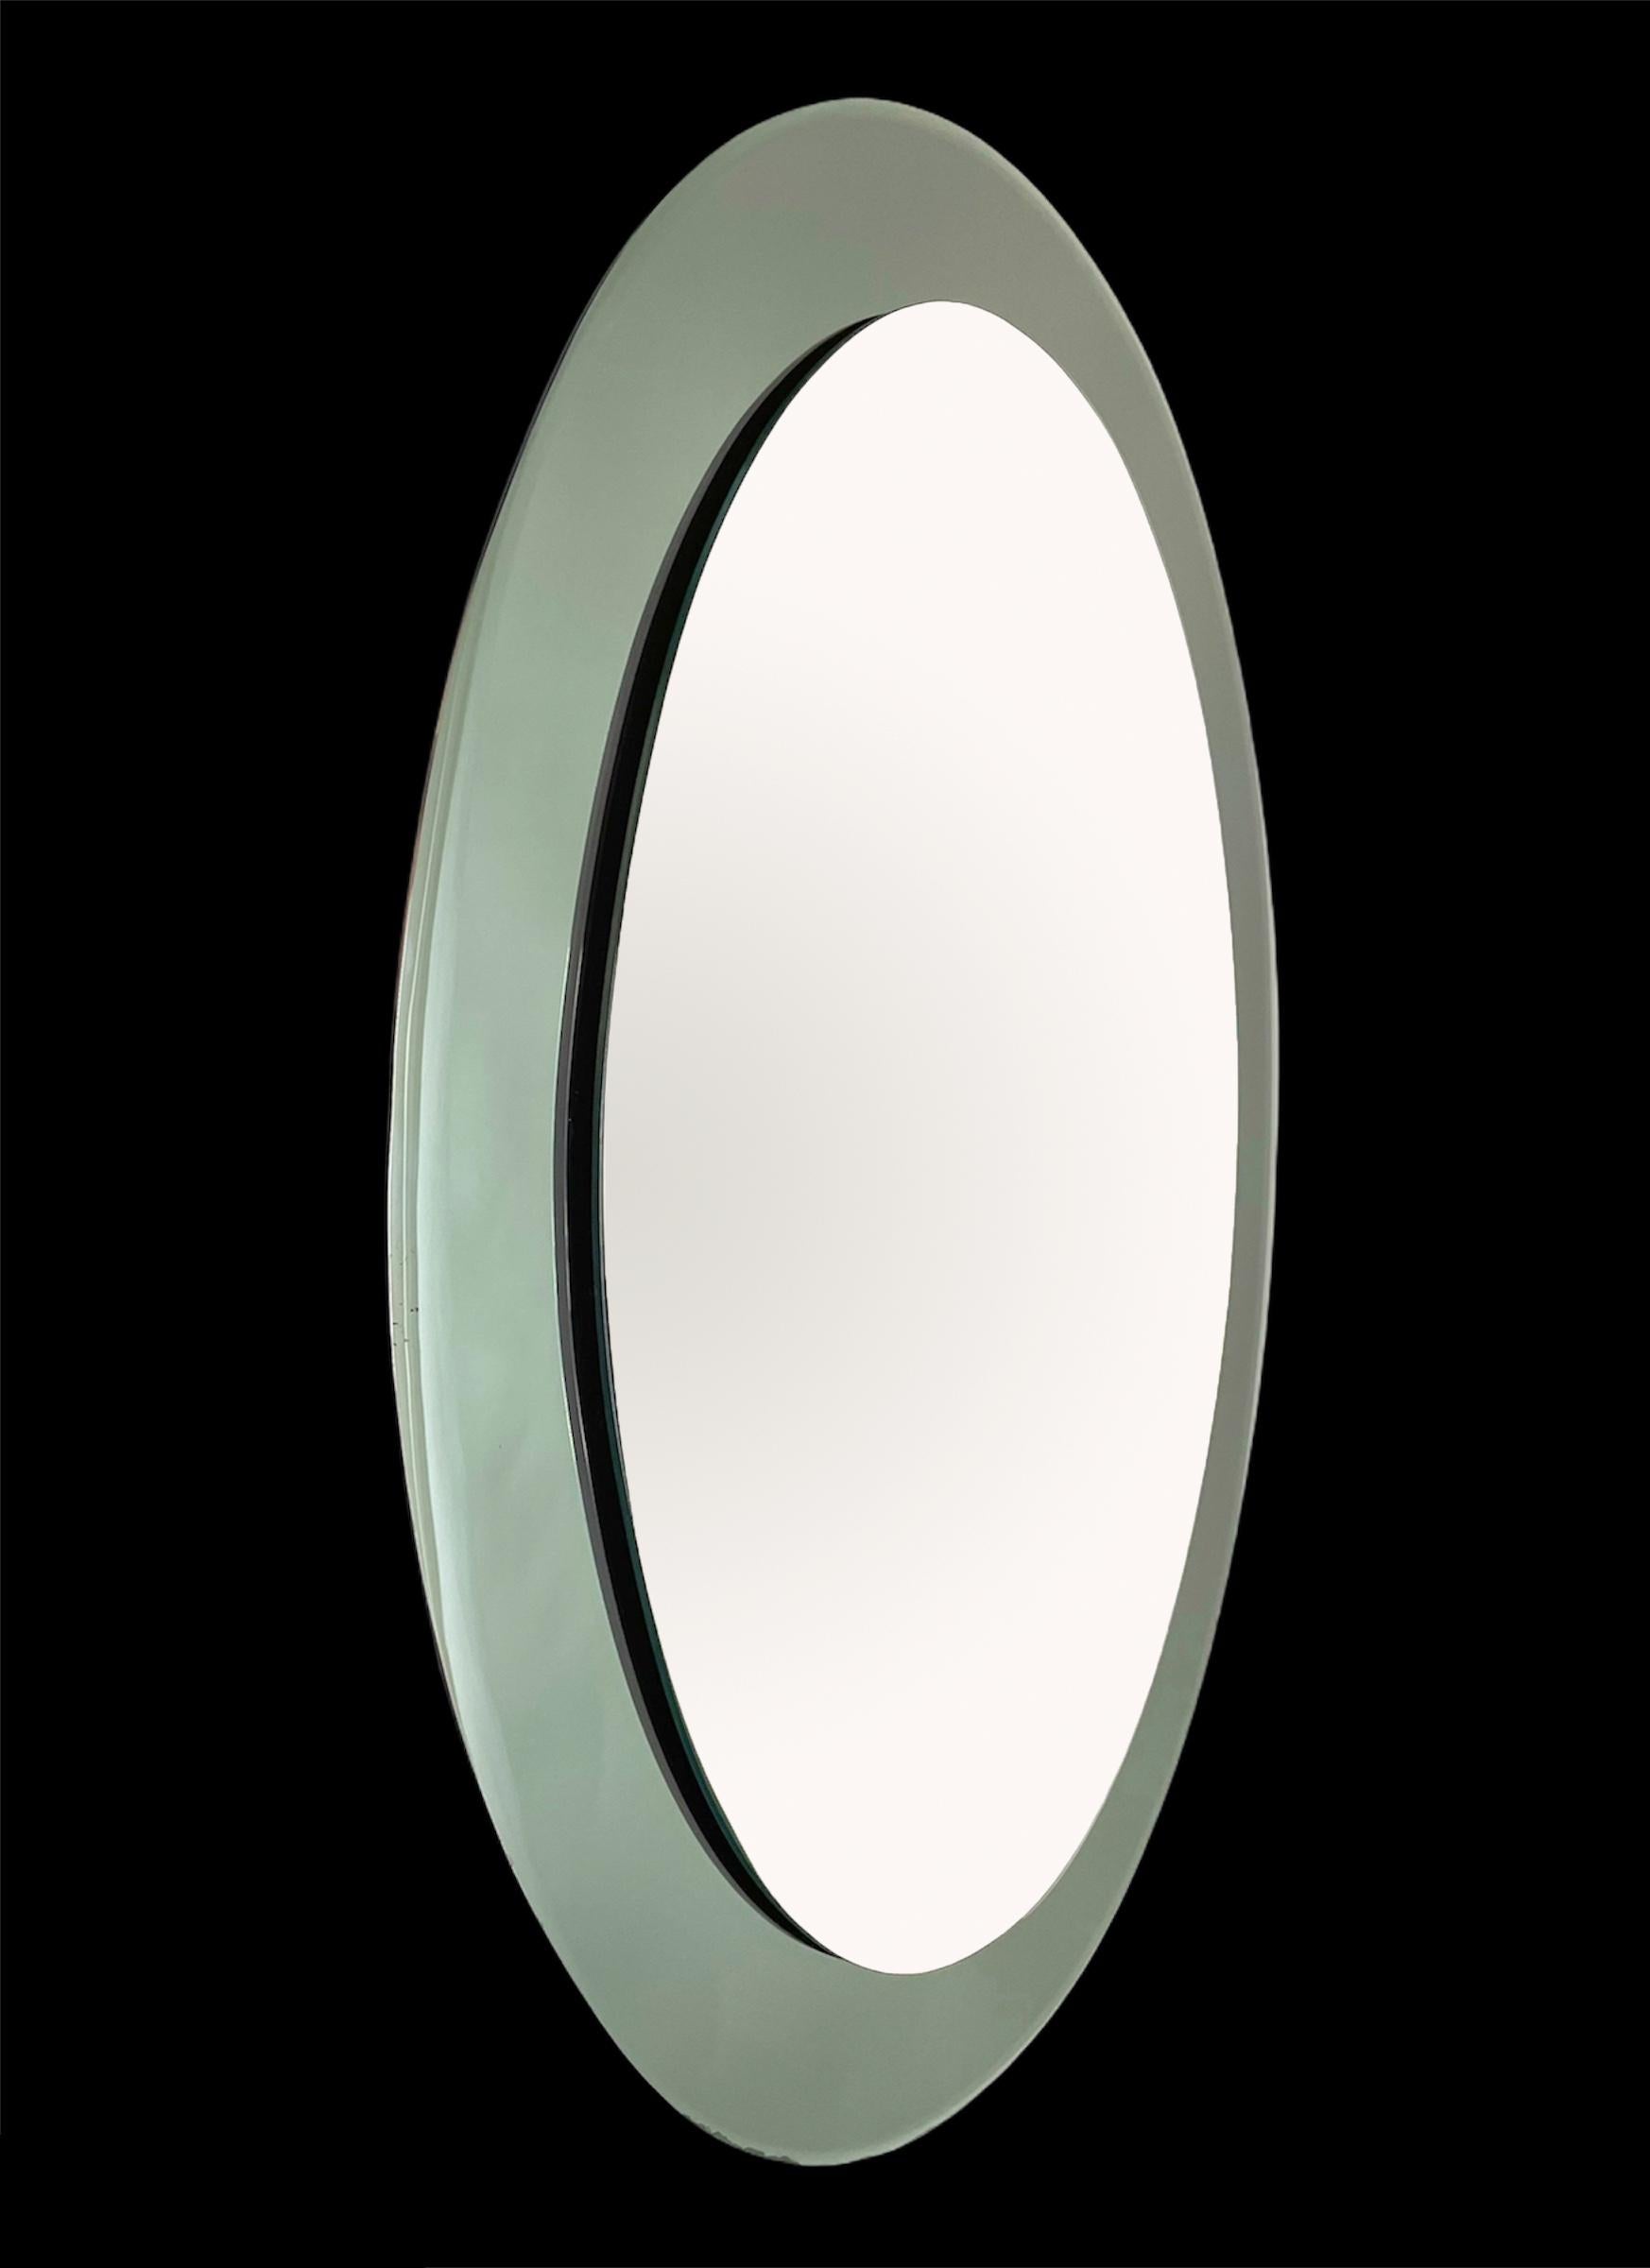 Mid-20th Century Midcentury Glass Framed Oval Wall Mirror Attributed to Cristal Art, Italy, 1960s